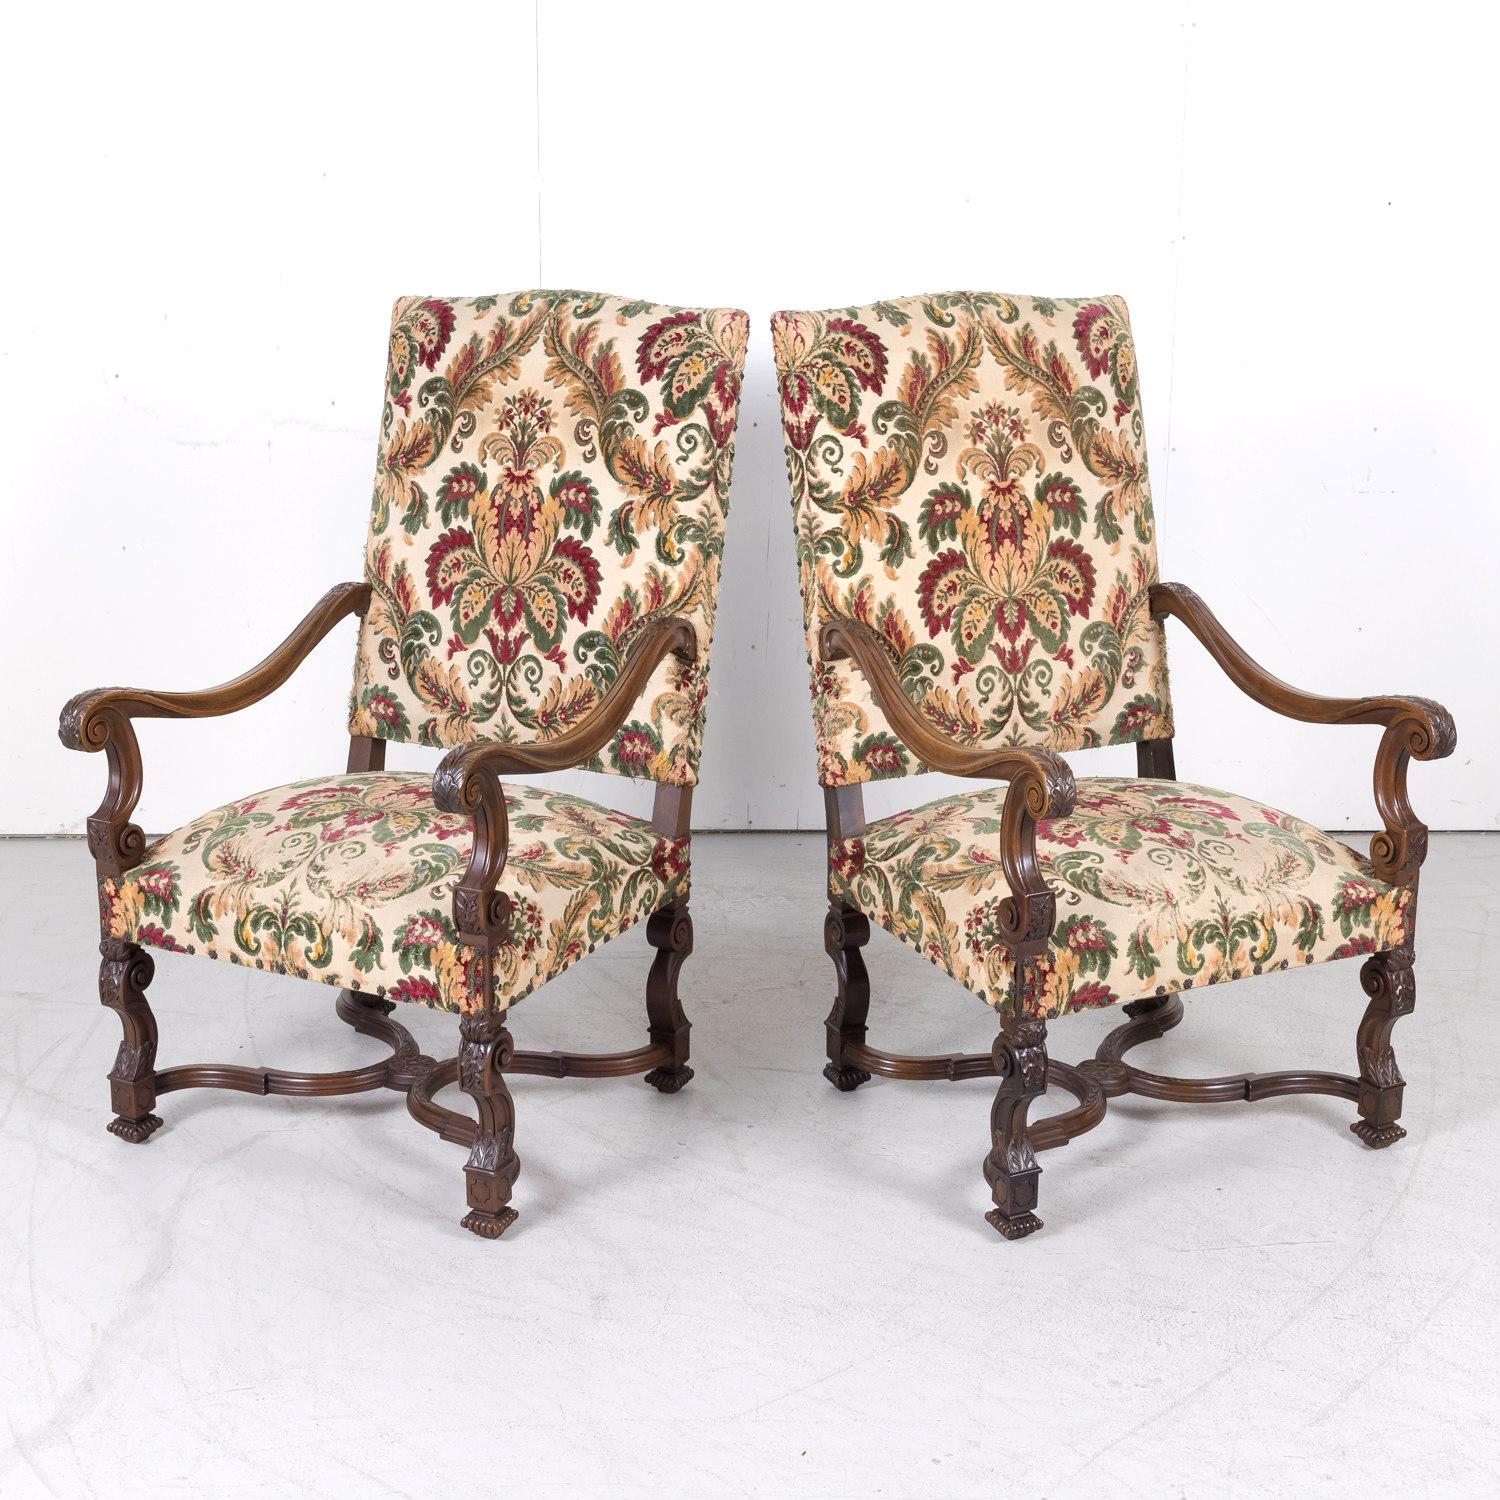 Beautifully carved pair of French Louis XIV style walnut fauteuils handcrafted in Lyon, circa 1820s, each having a high rectangle back and square section seat. Down-swept scrolling arms with volute acanthus carved armrests. Raised on a richly carved